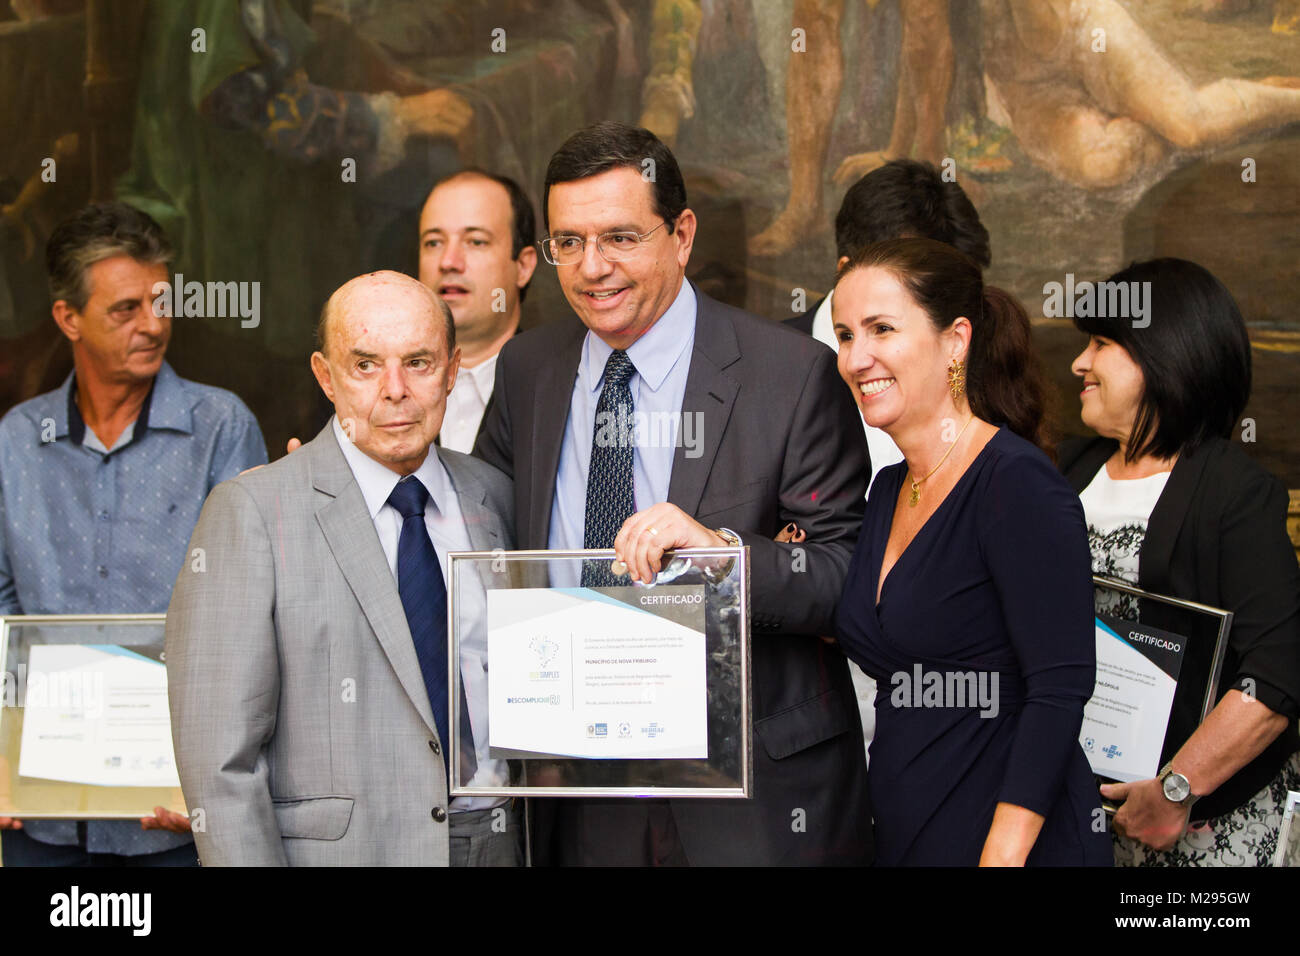 Rio De Janeiro, Brazil. 06th Feb, 2018. Renato Bravo, mayor of Nova Friburgo receiving a certificate from Deputy Governor Dornelles during the ceremony of delivery of the certificates of adhesion to the system of issuance of electronic license to 38 prefectures, the event will take place this Tuesday (06/02/2018) in the Hall Noble of the Guanabara Palace in Laranjeiras, Rio de Janeiro, RJ and attended by the governor of Rio, Luiz Fernando Pezão, participates in the event. Credit: Rodrigo Chadí/FotoArena/Alamy Live News Stock Photo